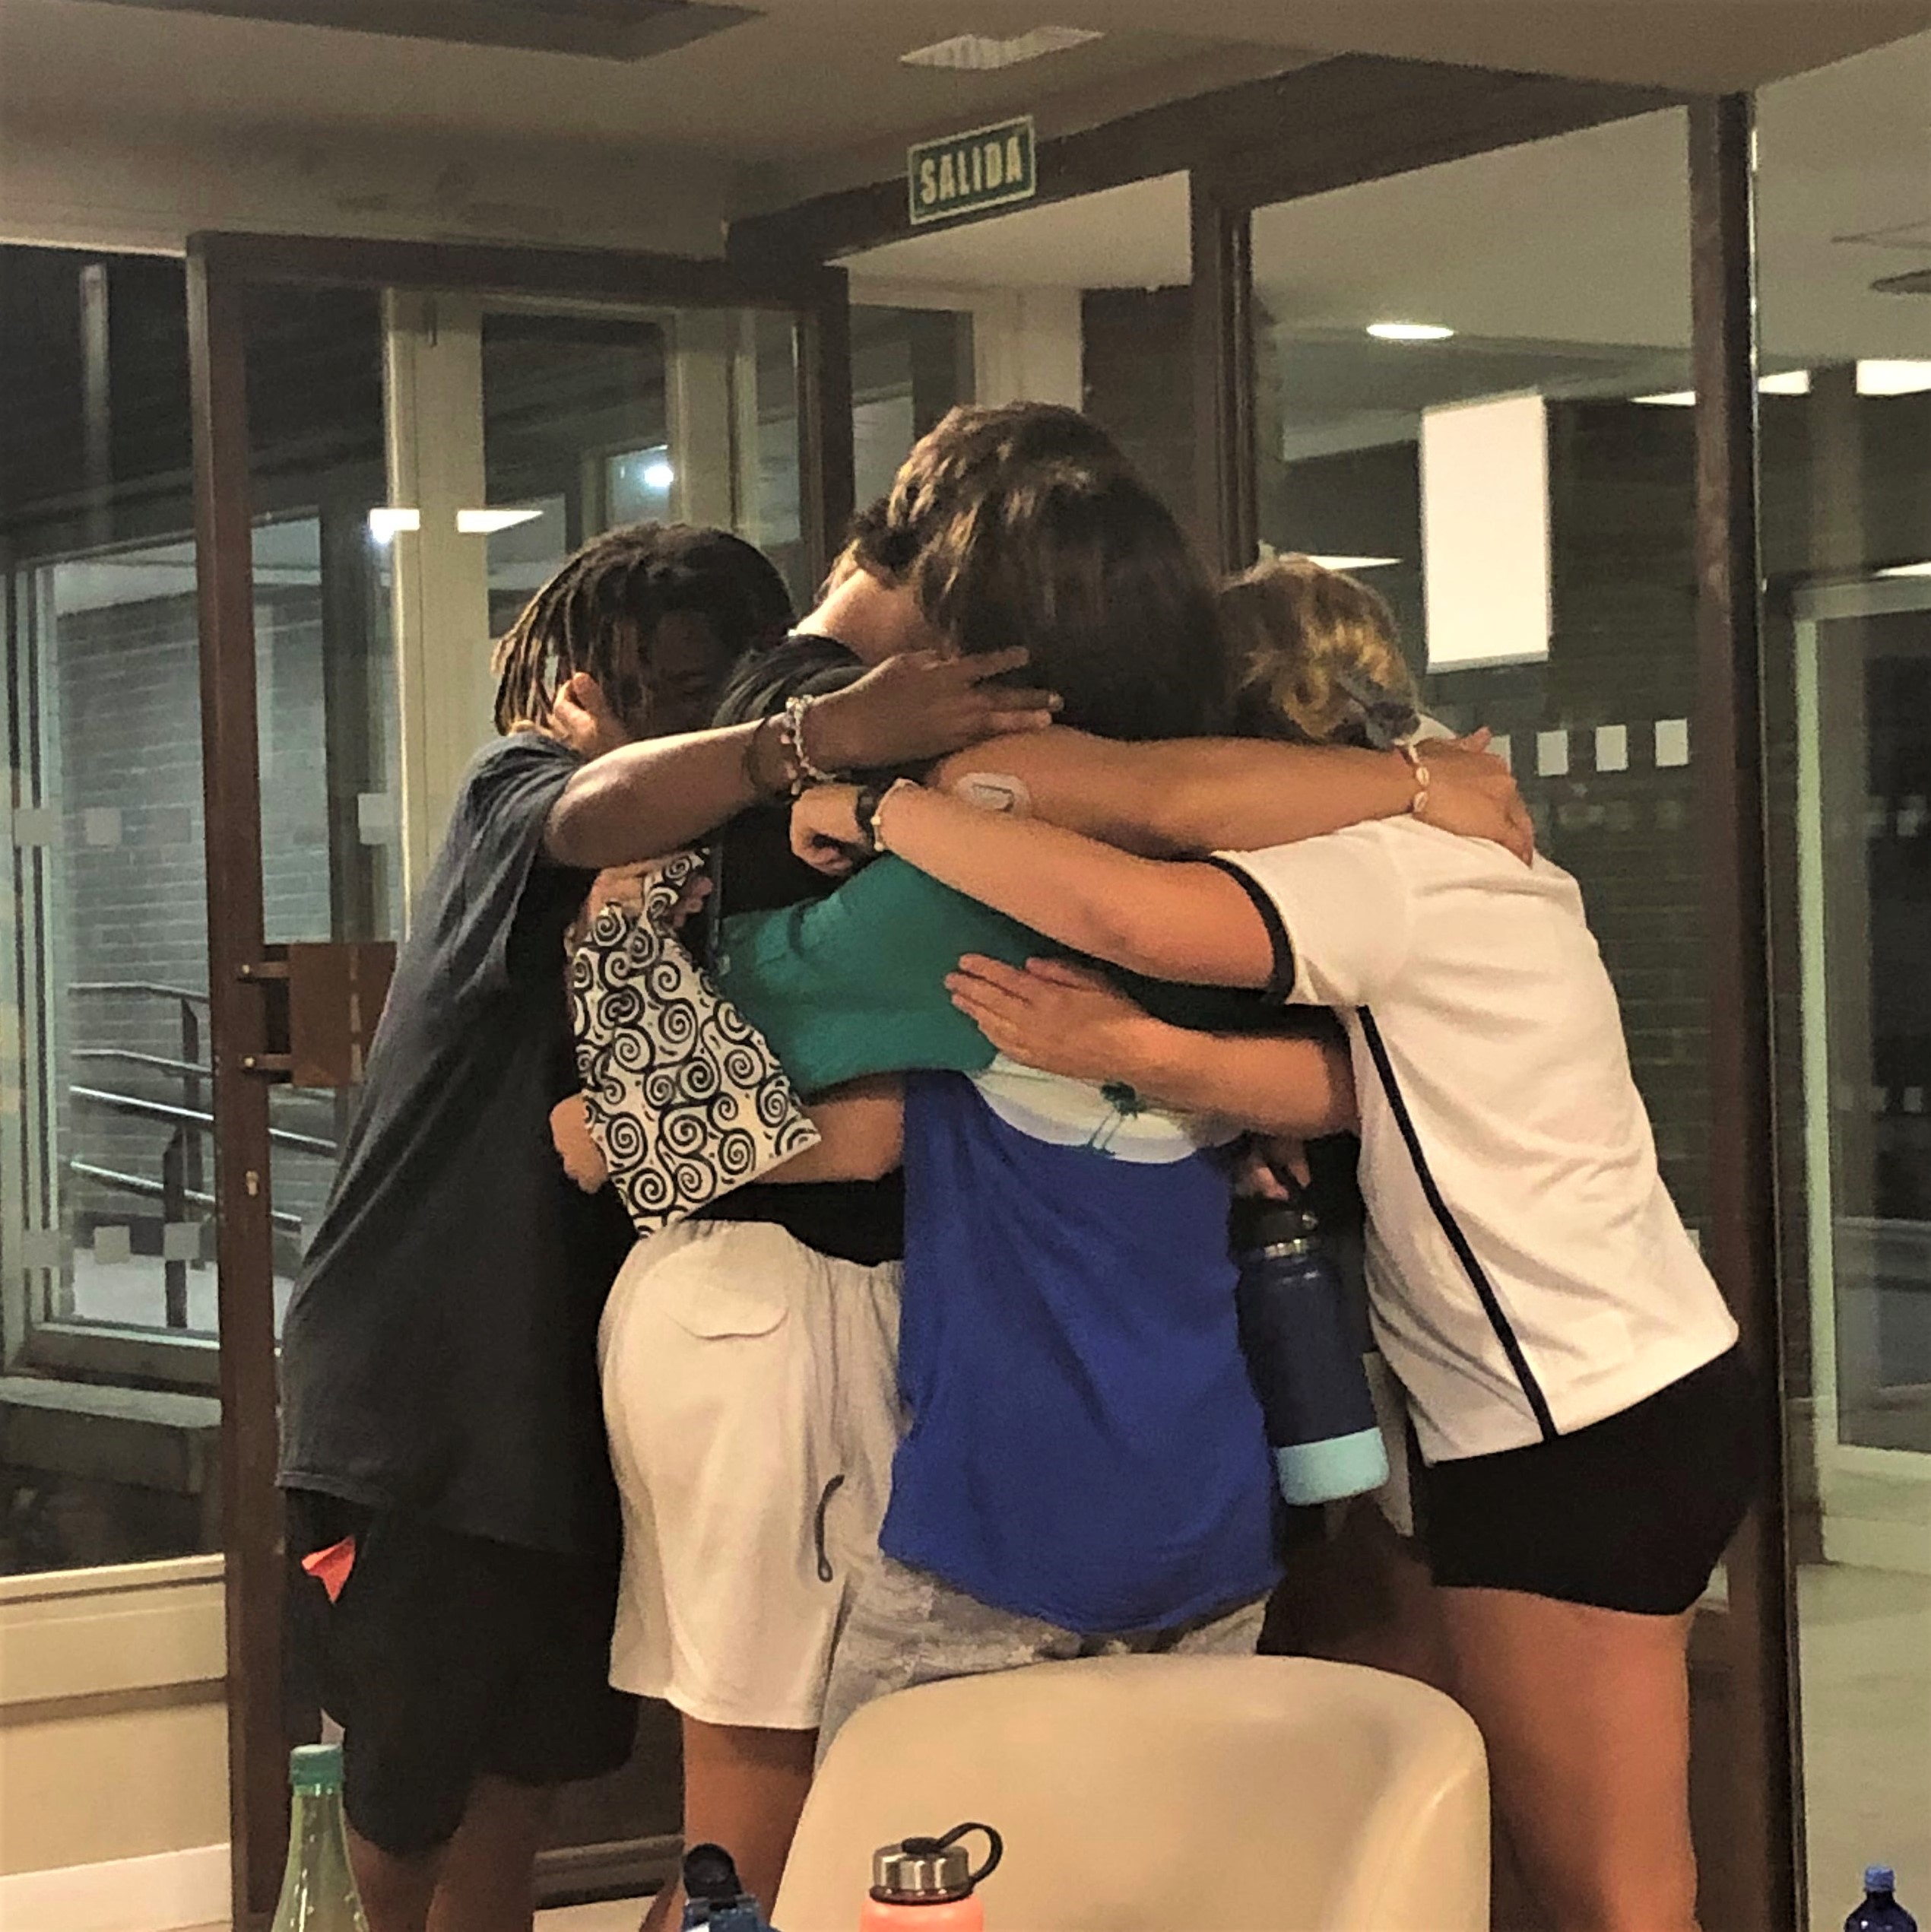 A group of students hugs